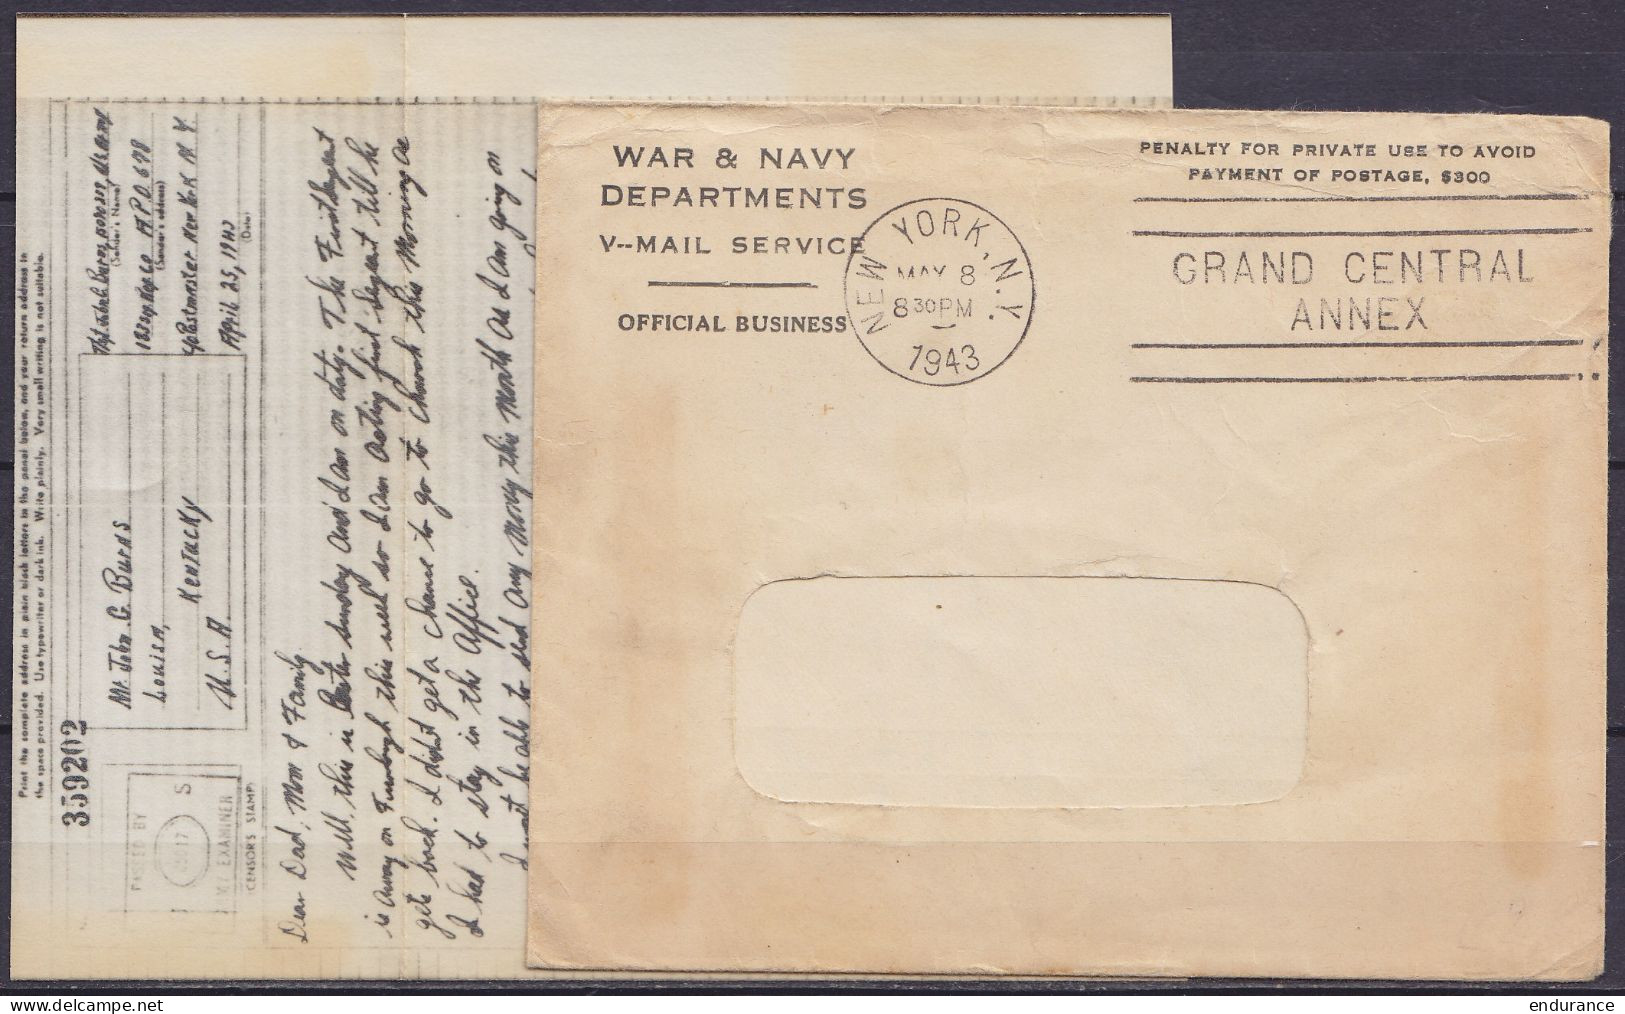 USA - V-MAIL WAR & NAVY DEPARTMENT Flam. "NEW YORK /MAY 8 1943/ GRAND CENTRAL ANNEX" Pour LOUISA Kentucky - Storia Postale